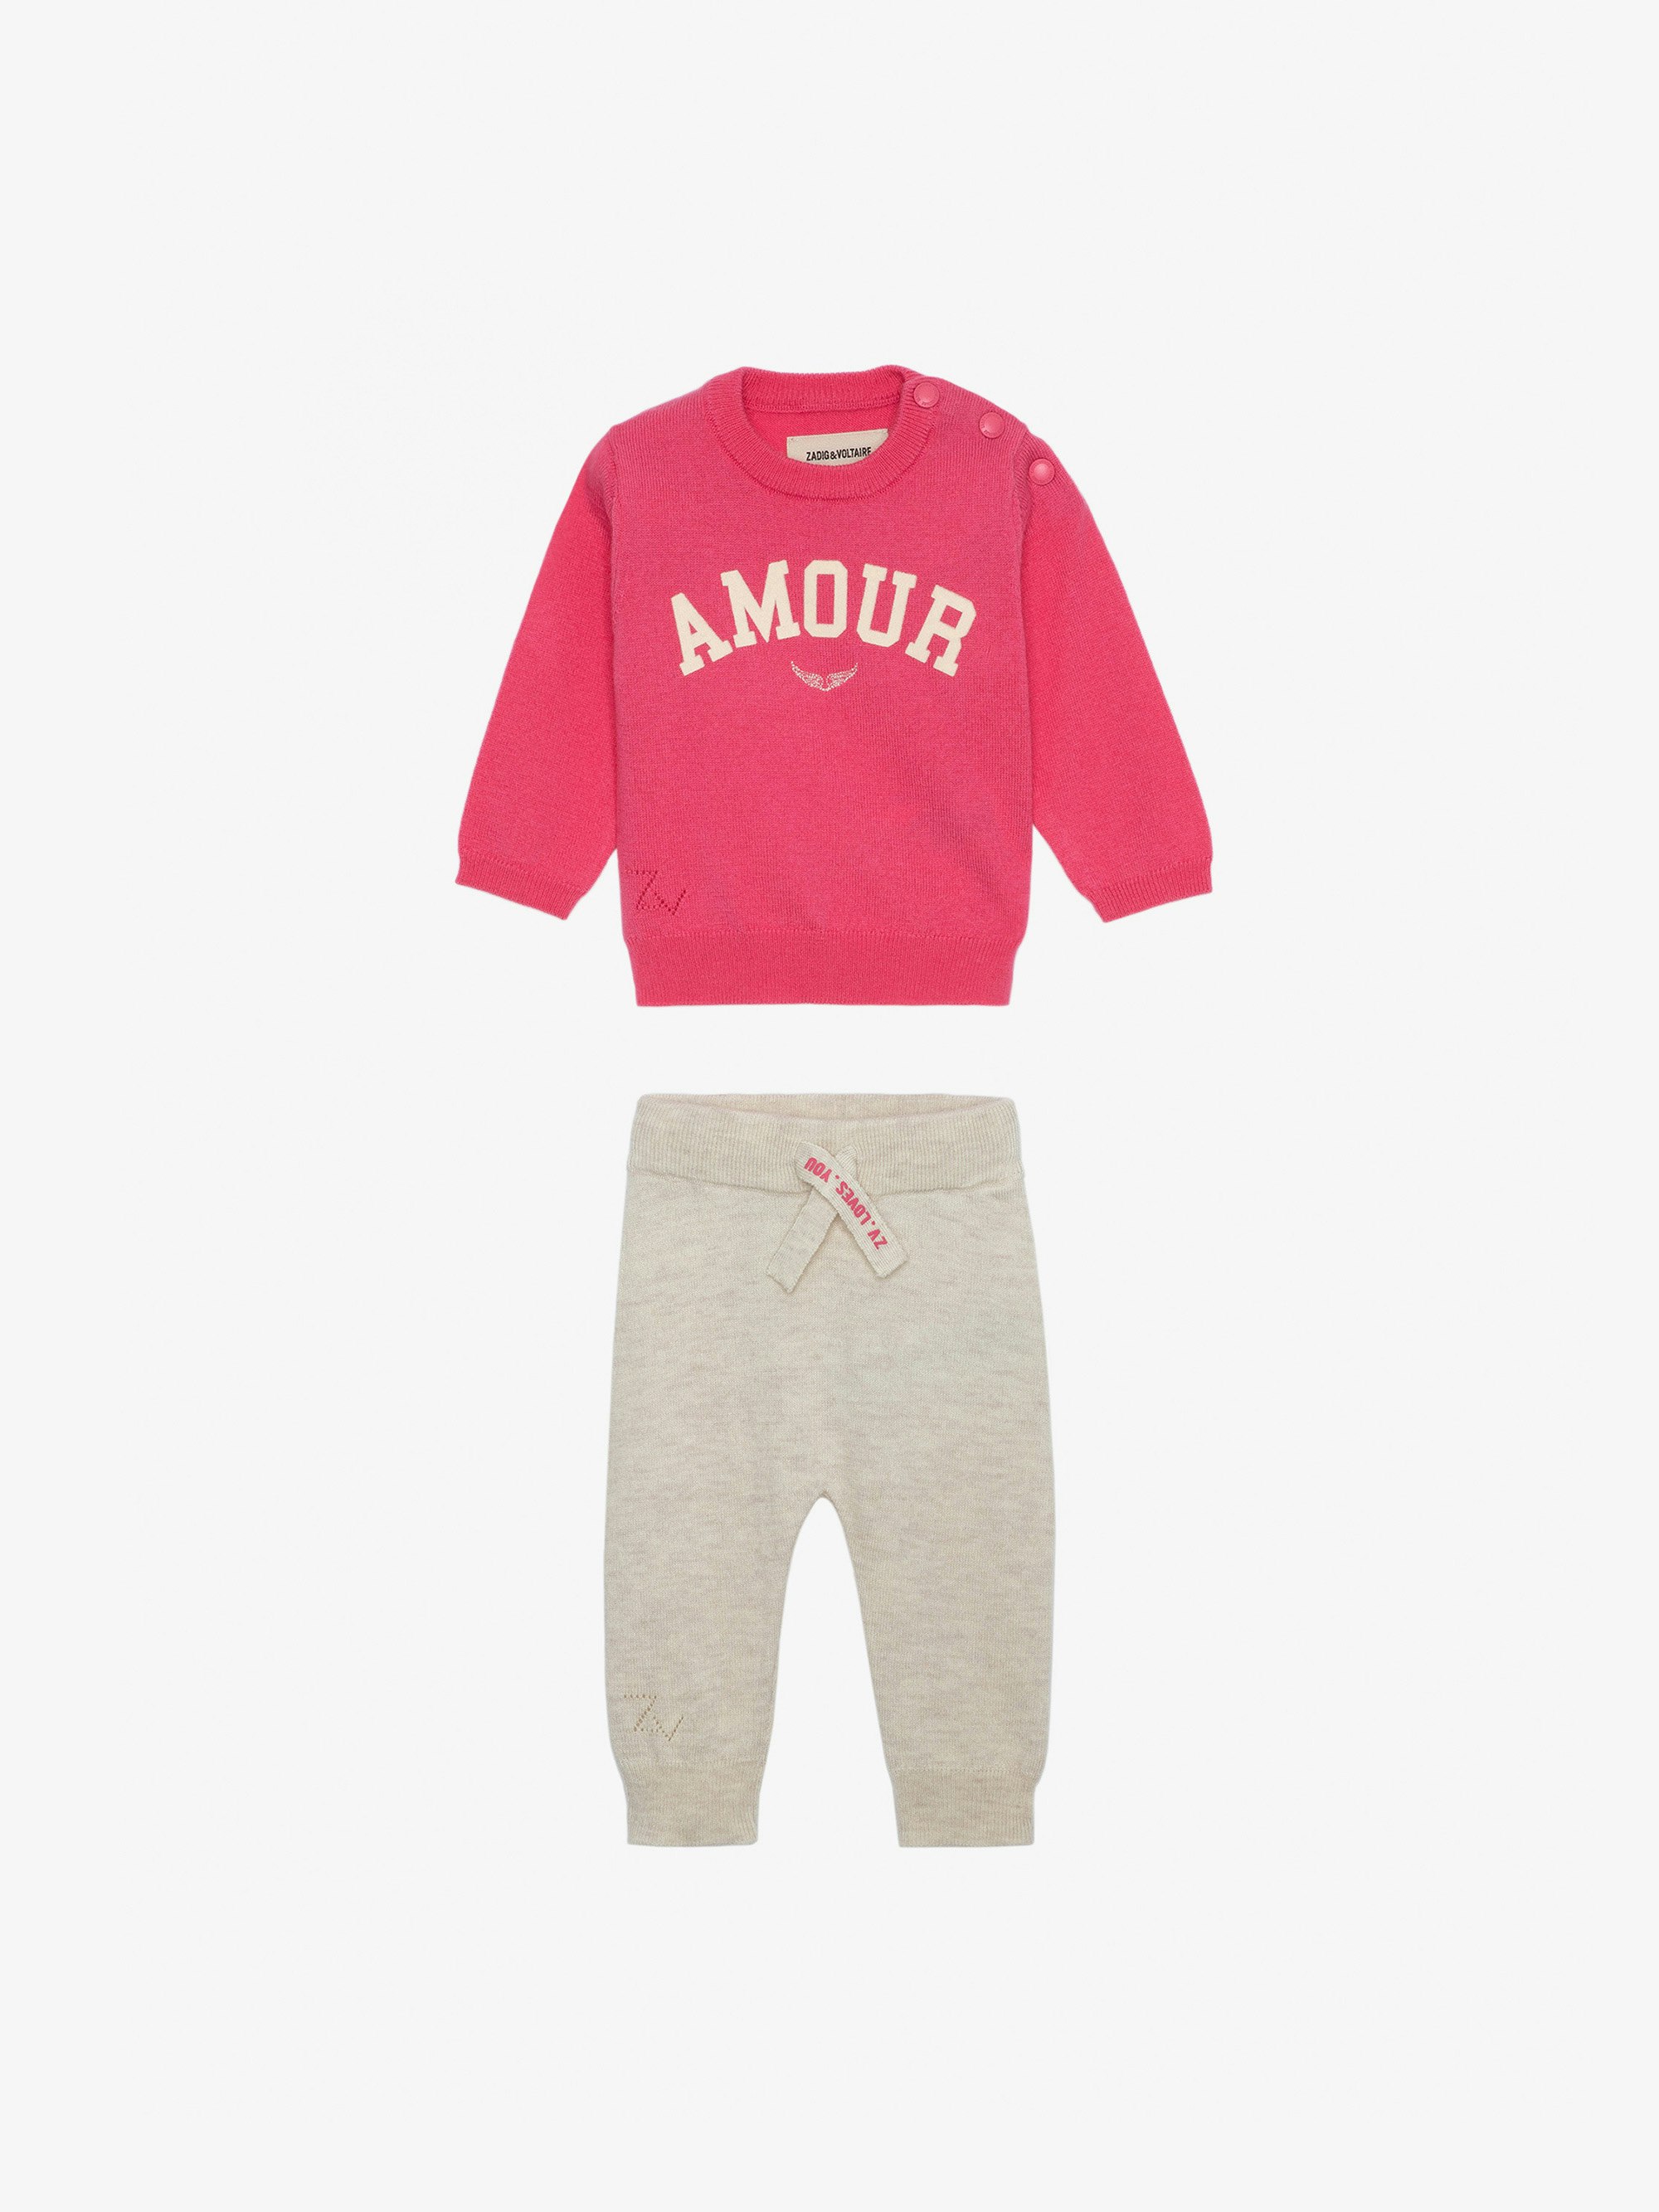 Pona Baby Set - Two-piece baby set with pink knit “Amour” slogan jumper and trousers.